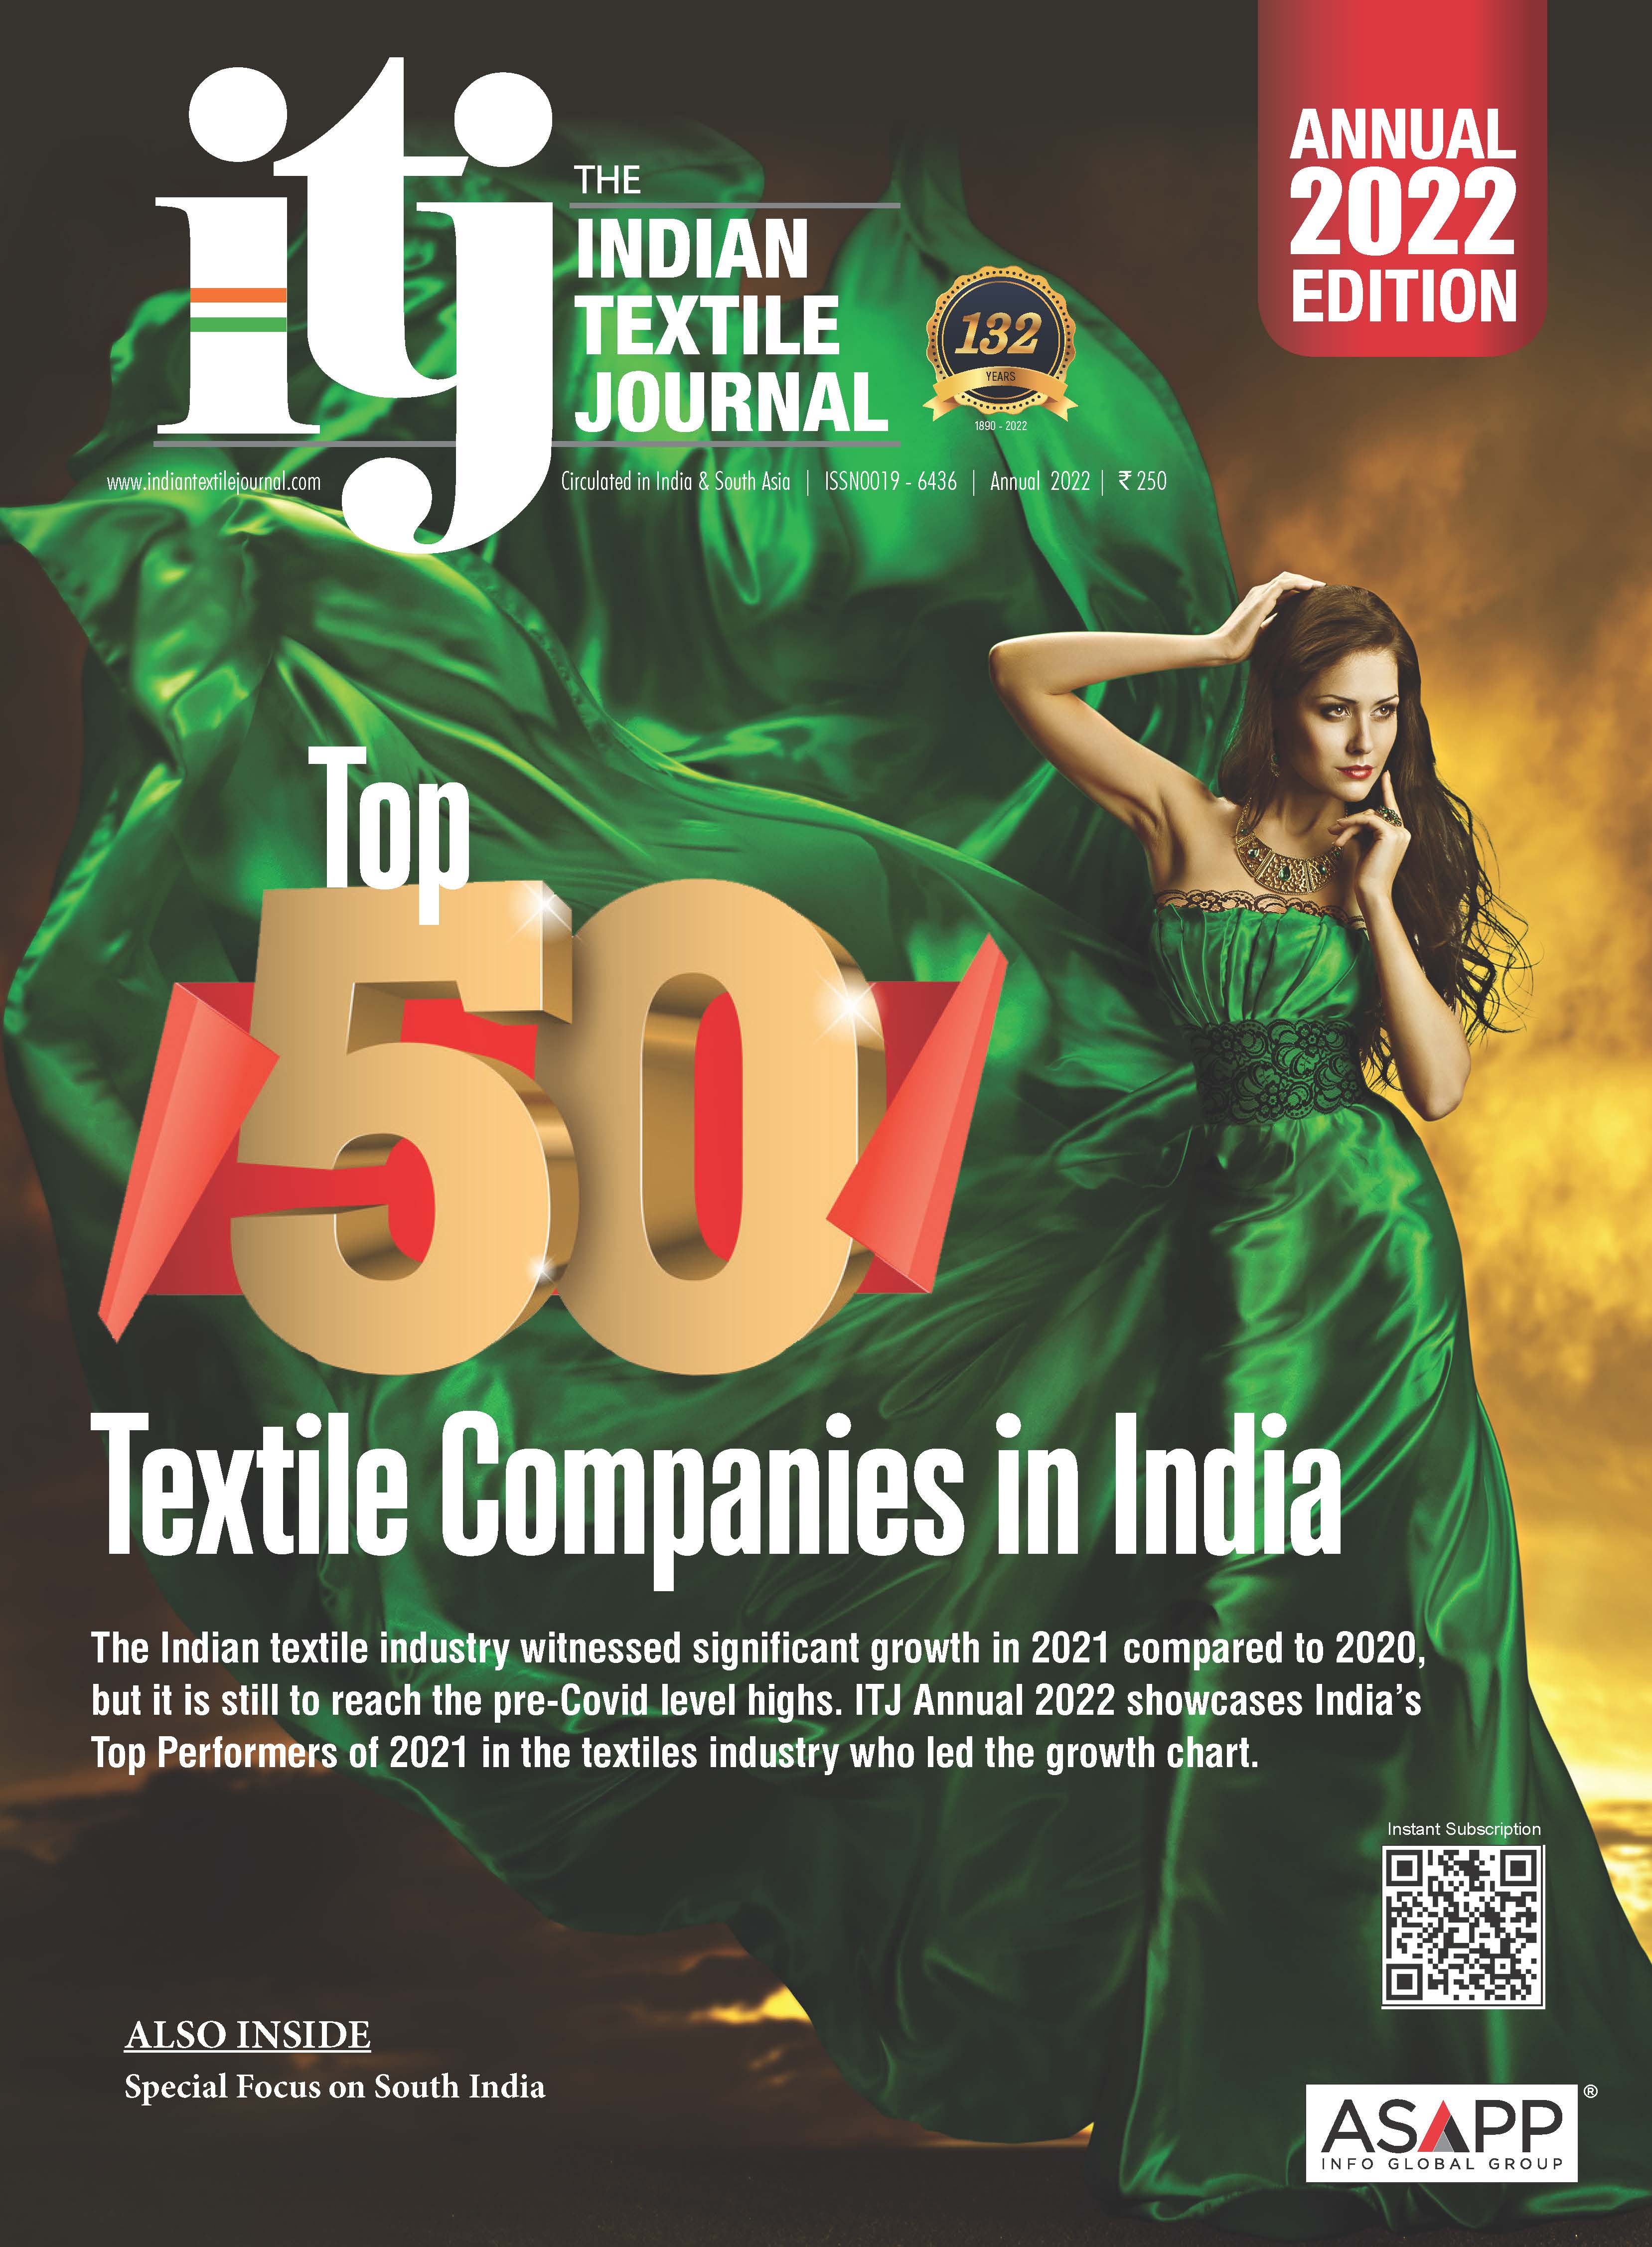 The Indian Textile Journal - Annual